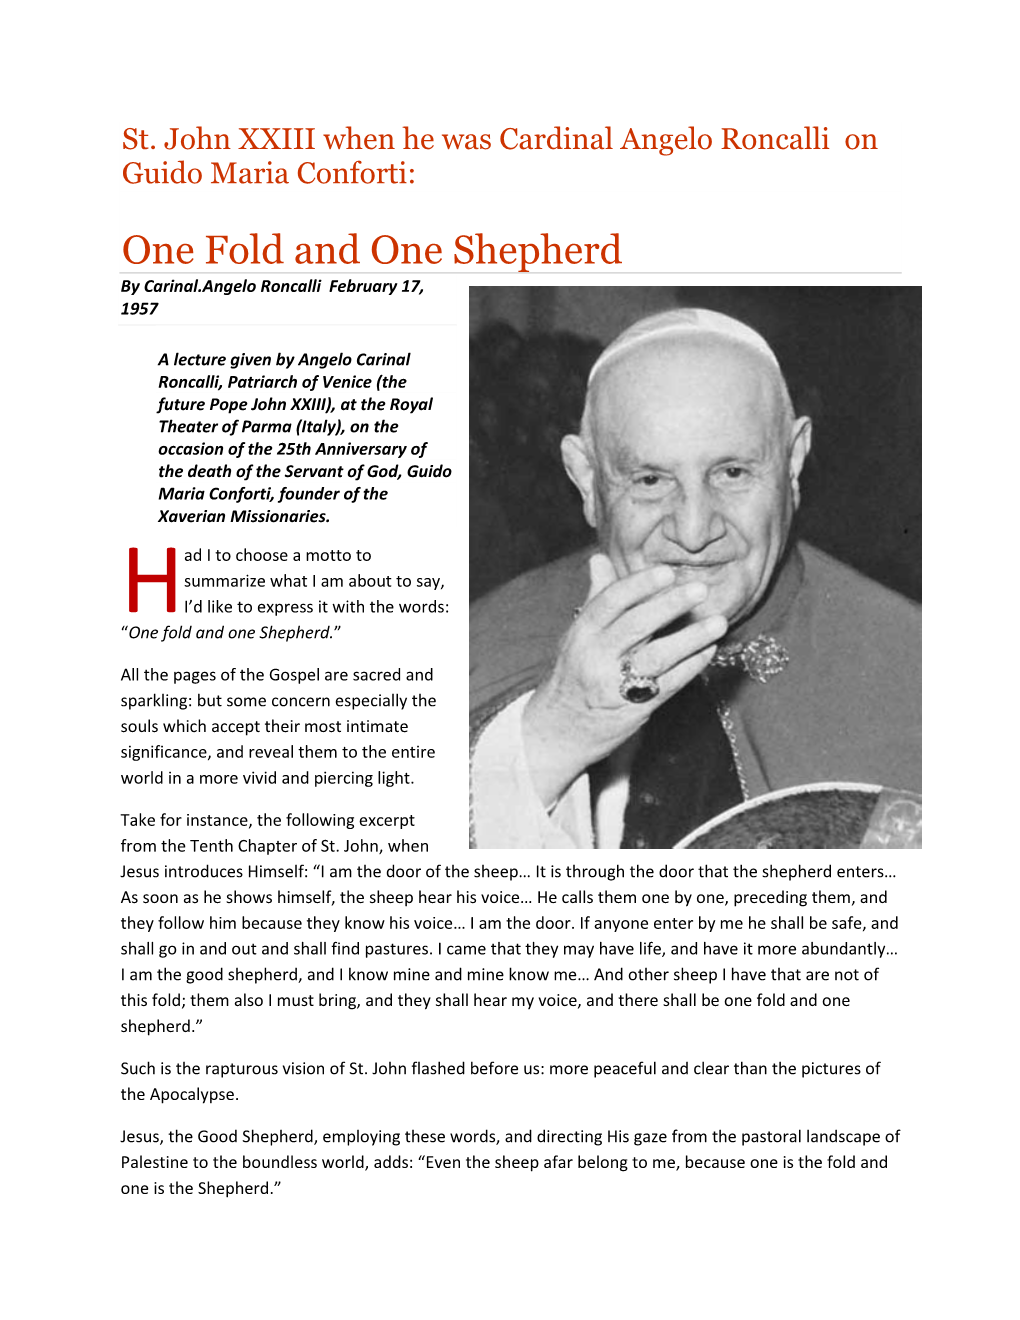 One Fold and One Shepherd by Carinal.Angelo Roncalli February 17, 1957